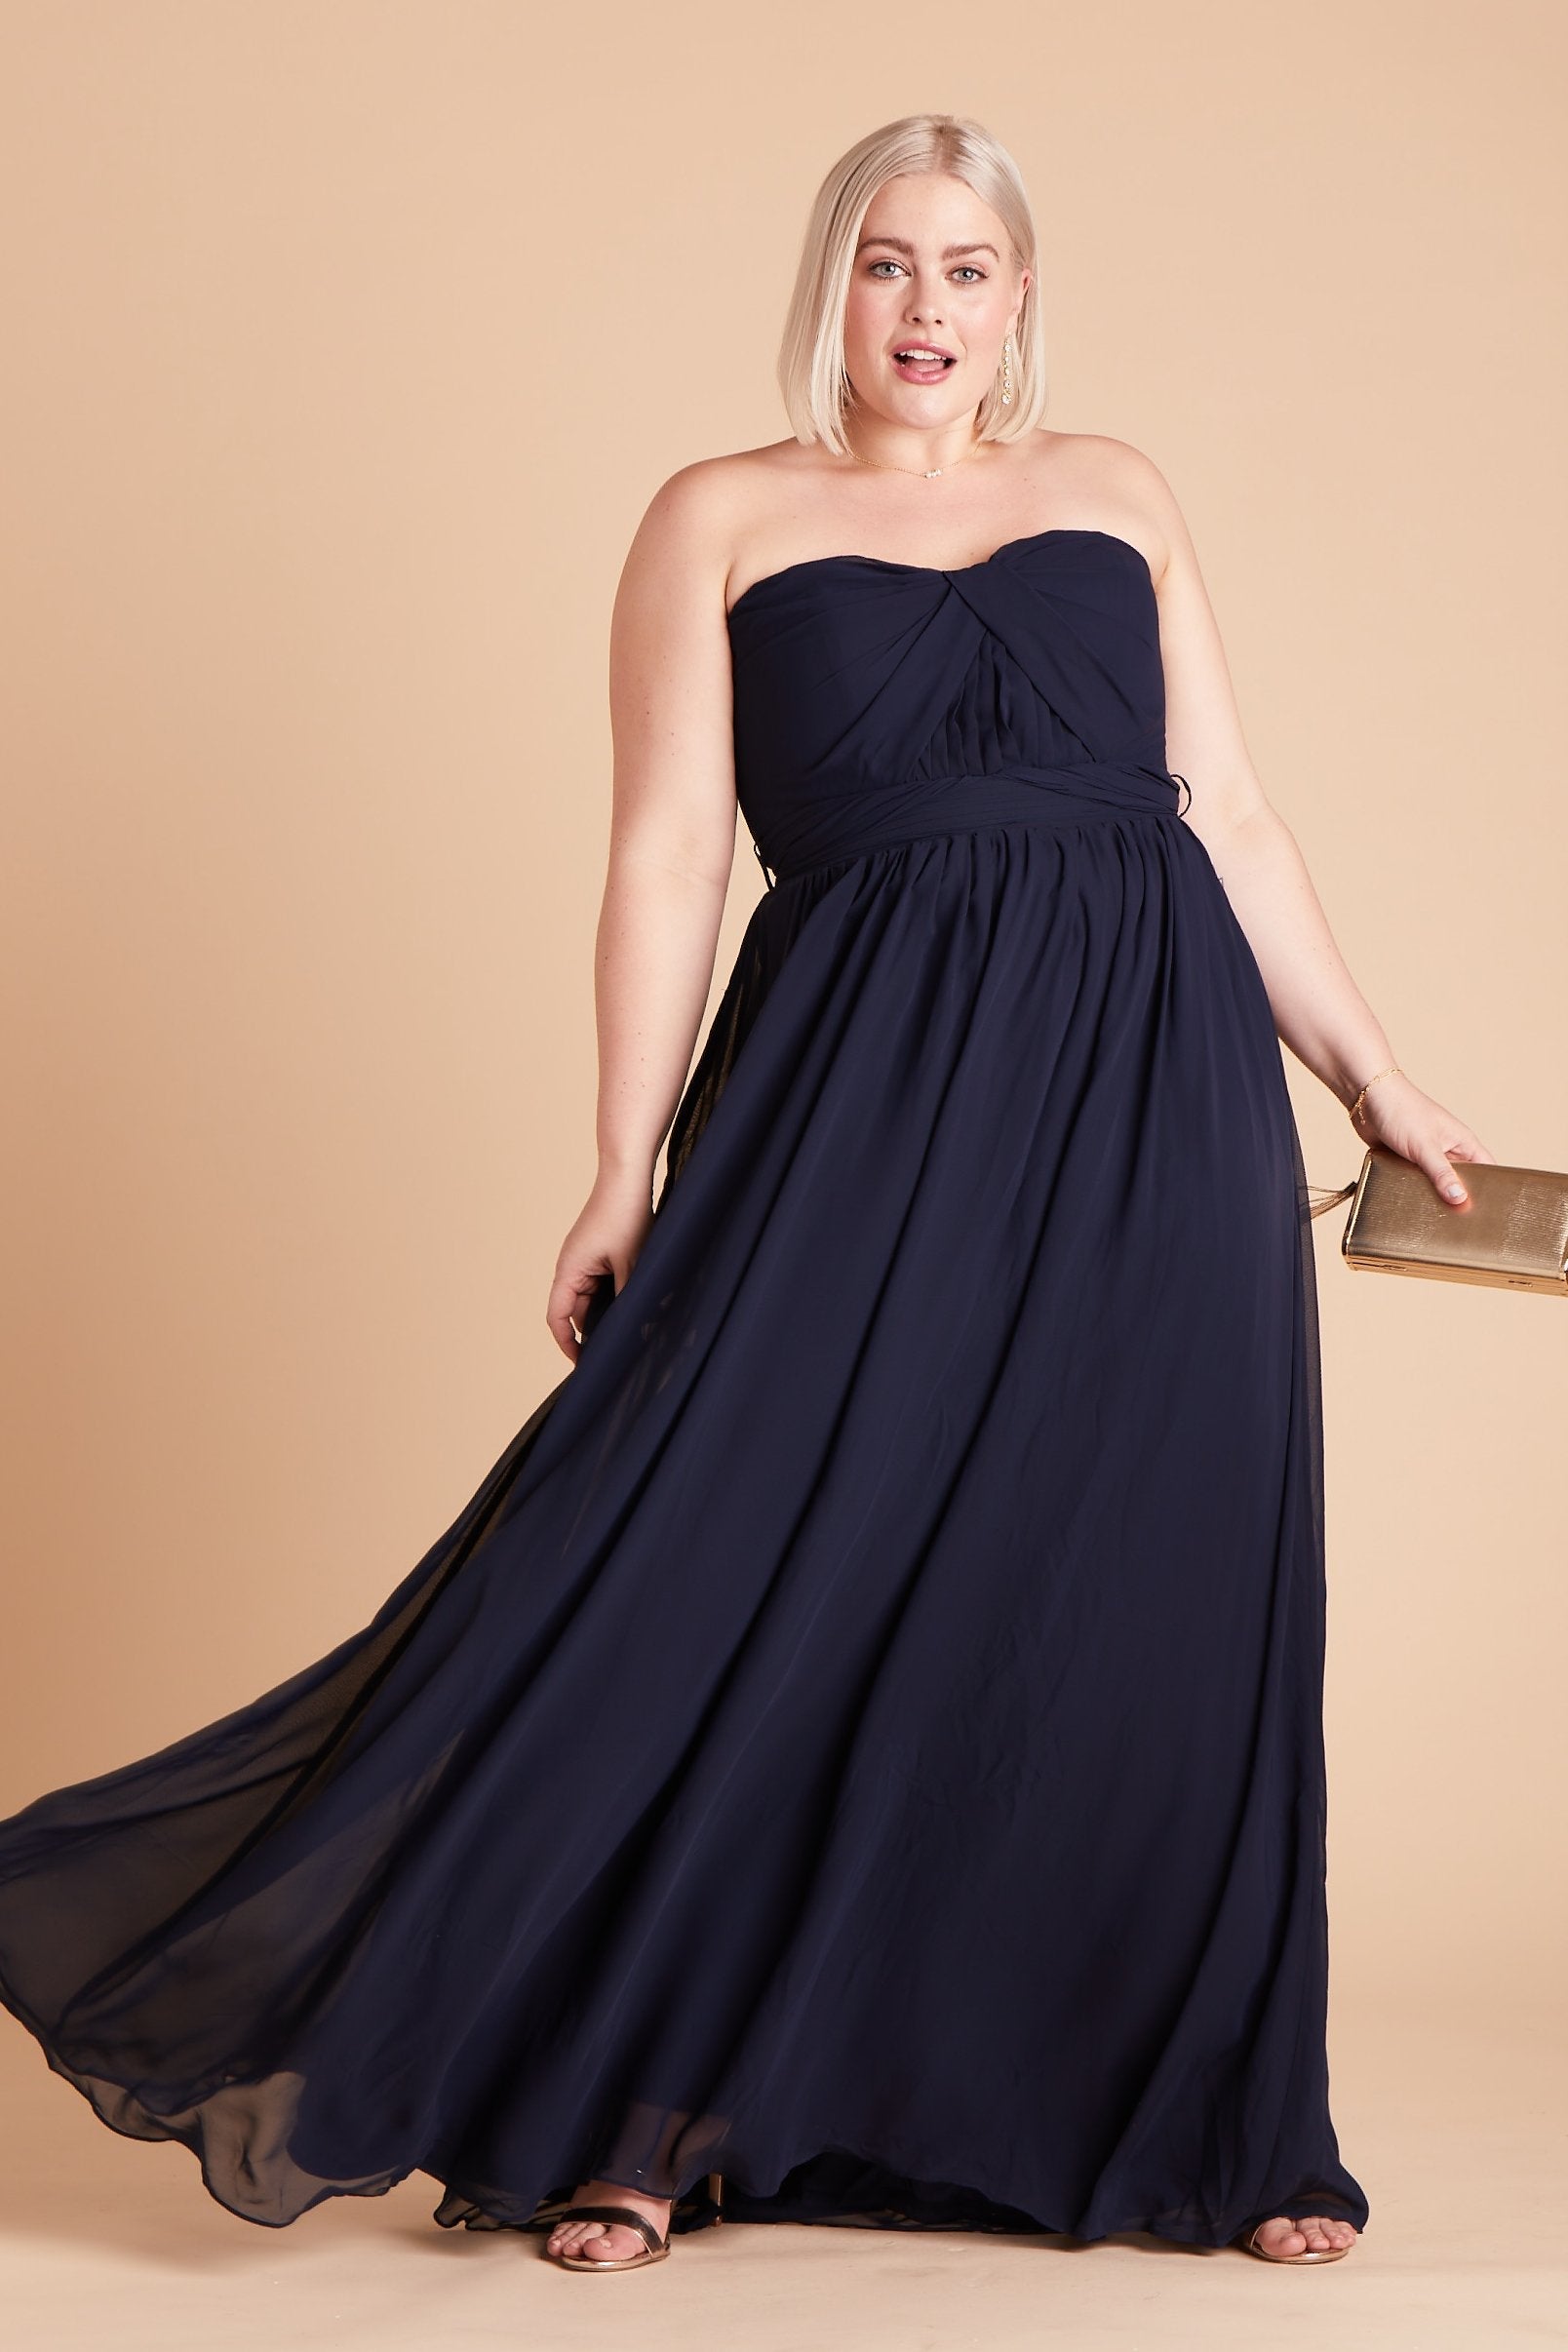 Grace convertible plus size bridesmaid dress in navy blue chiffon by Birdy Grey, front view